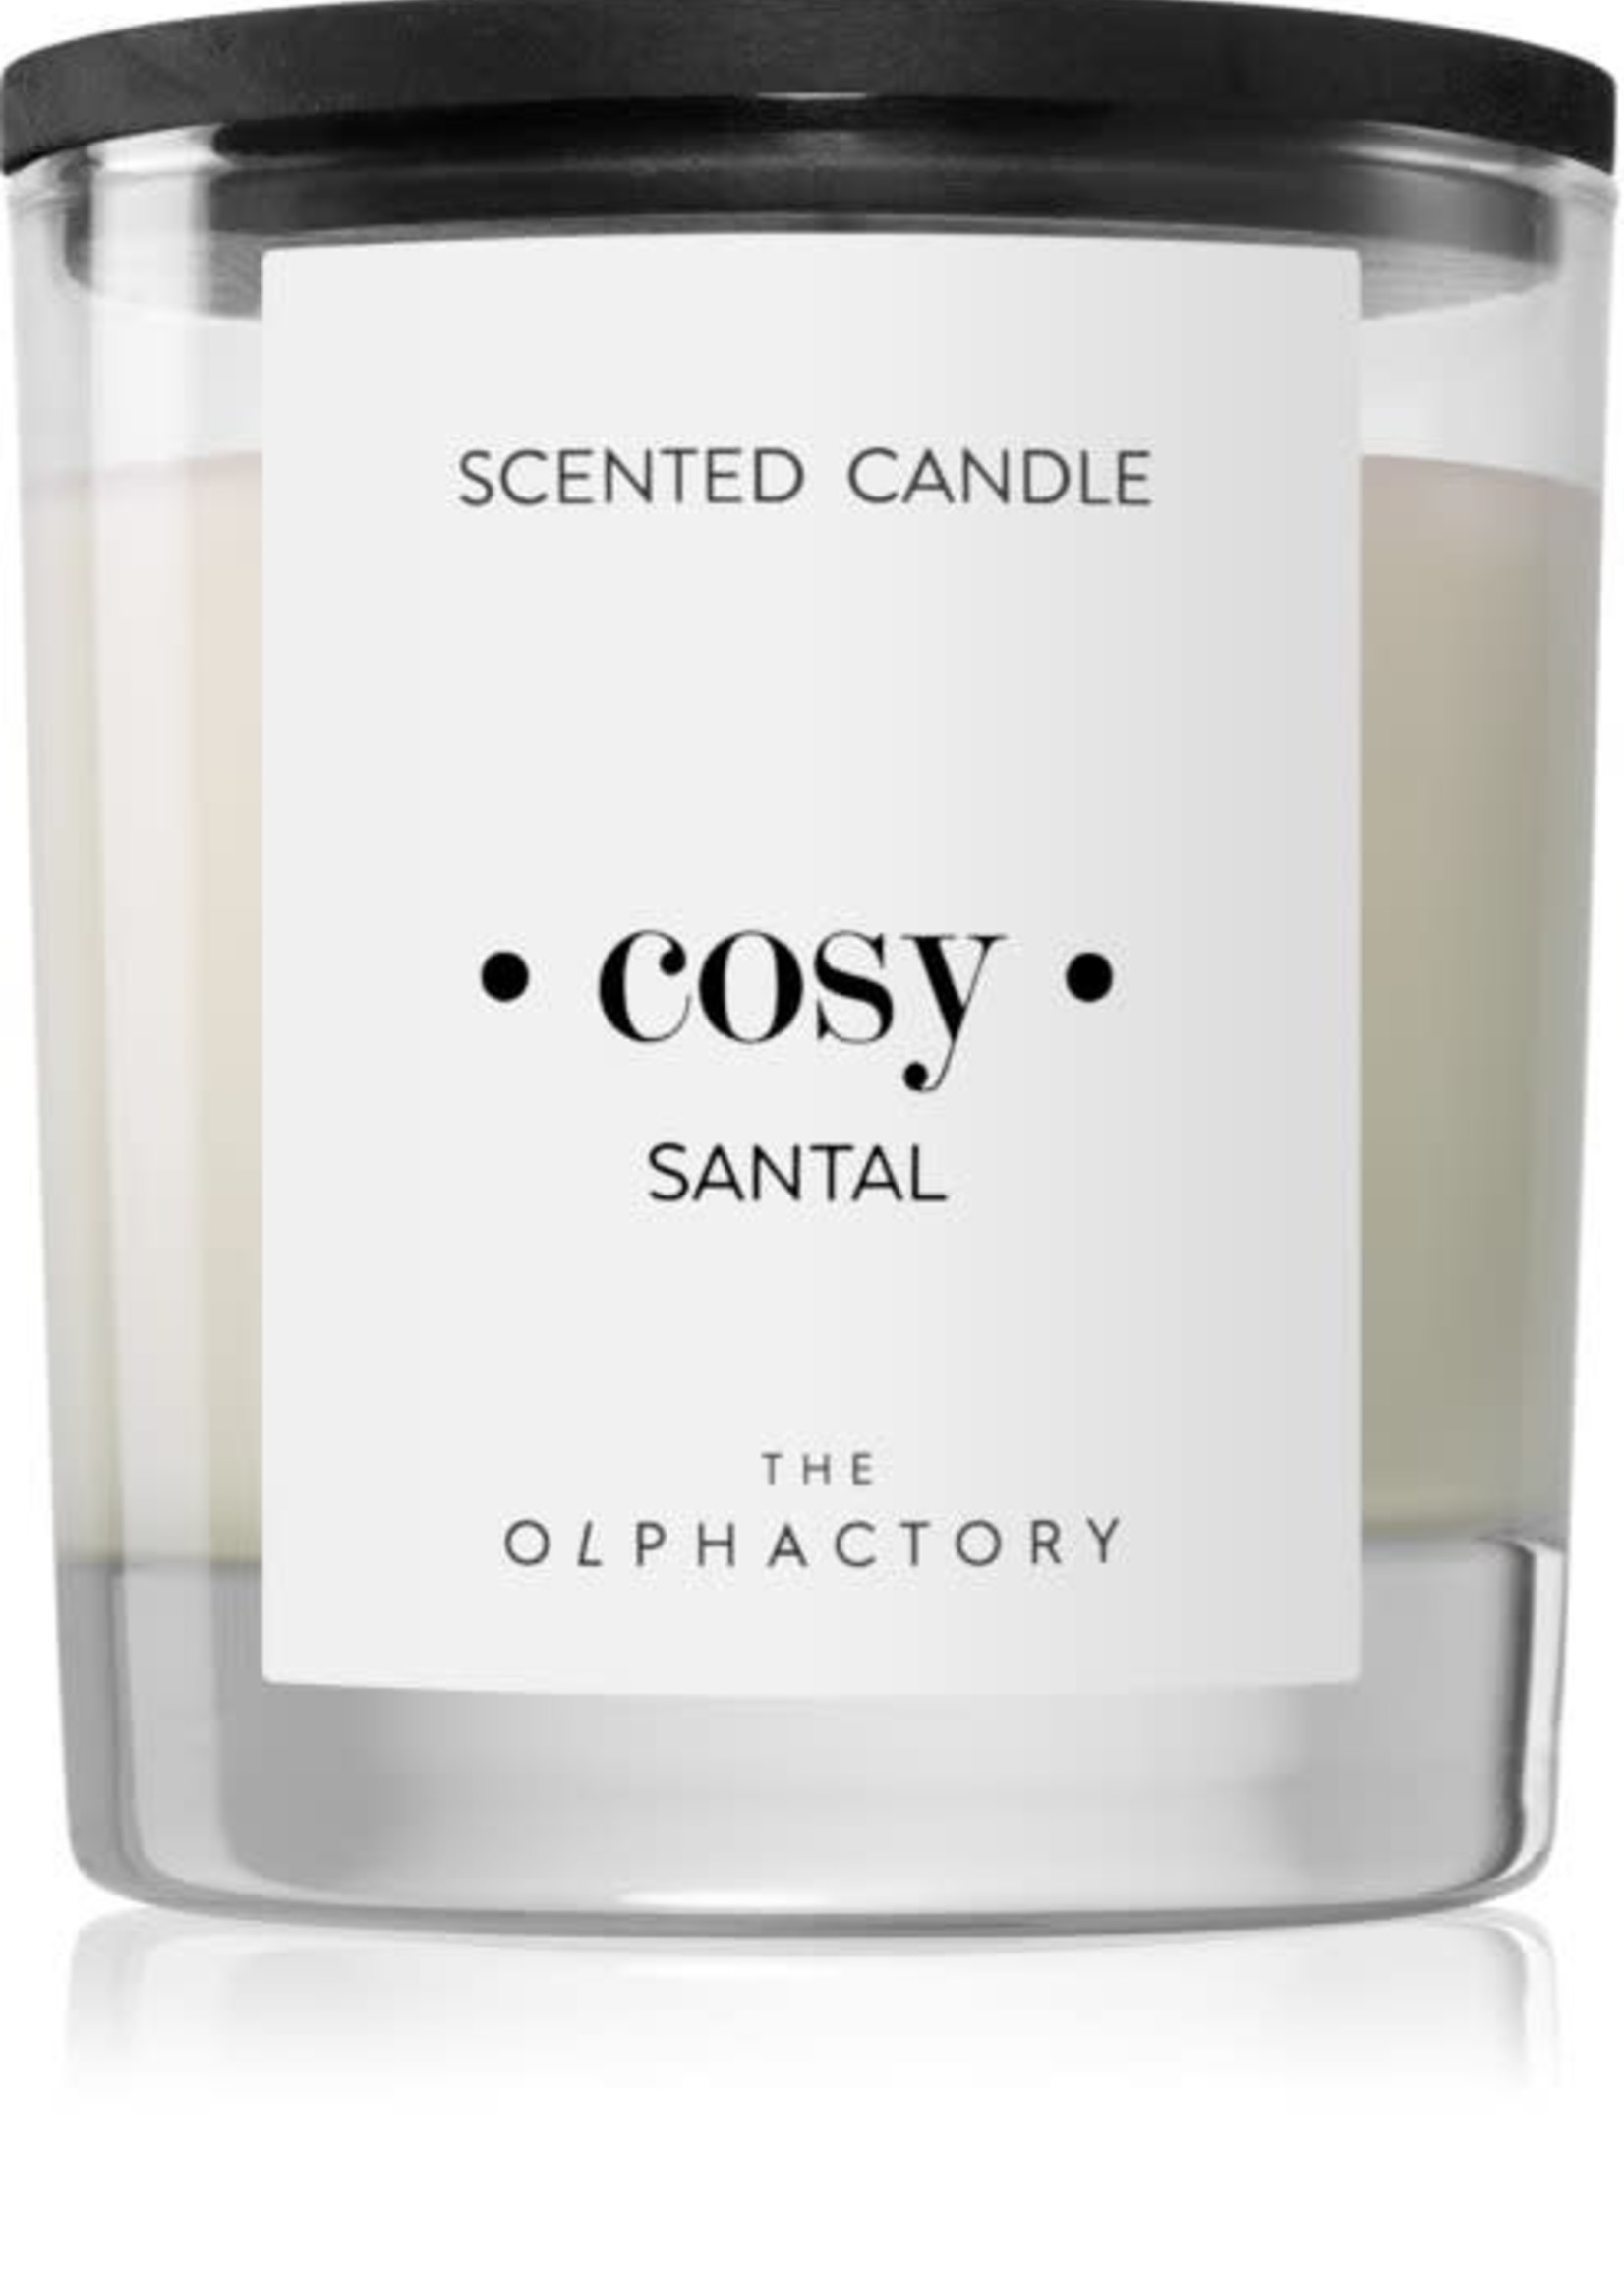 The Olphactory The Olpactory - Scented Candle -  Santal